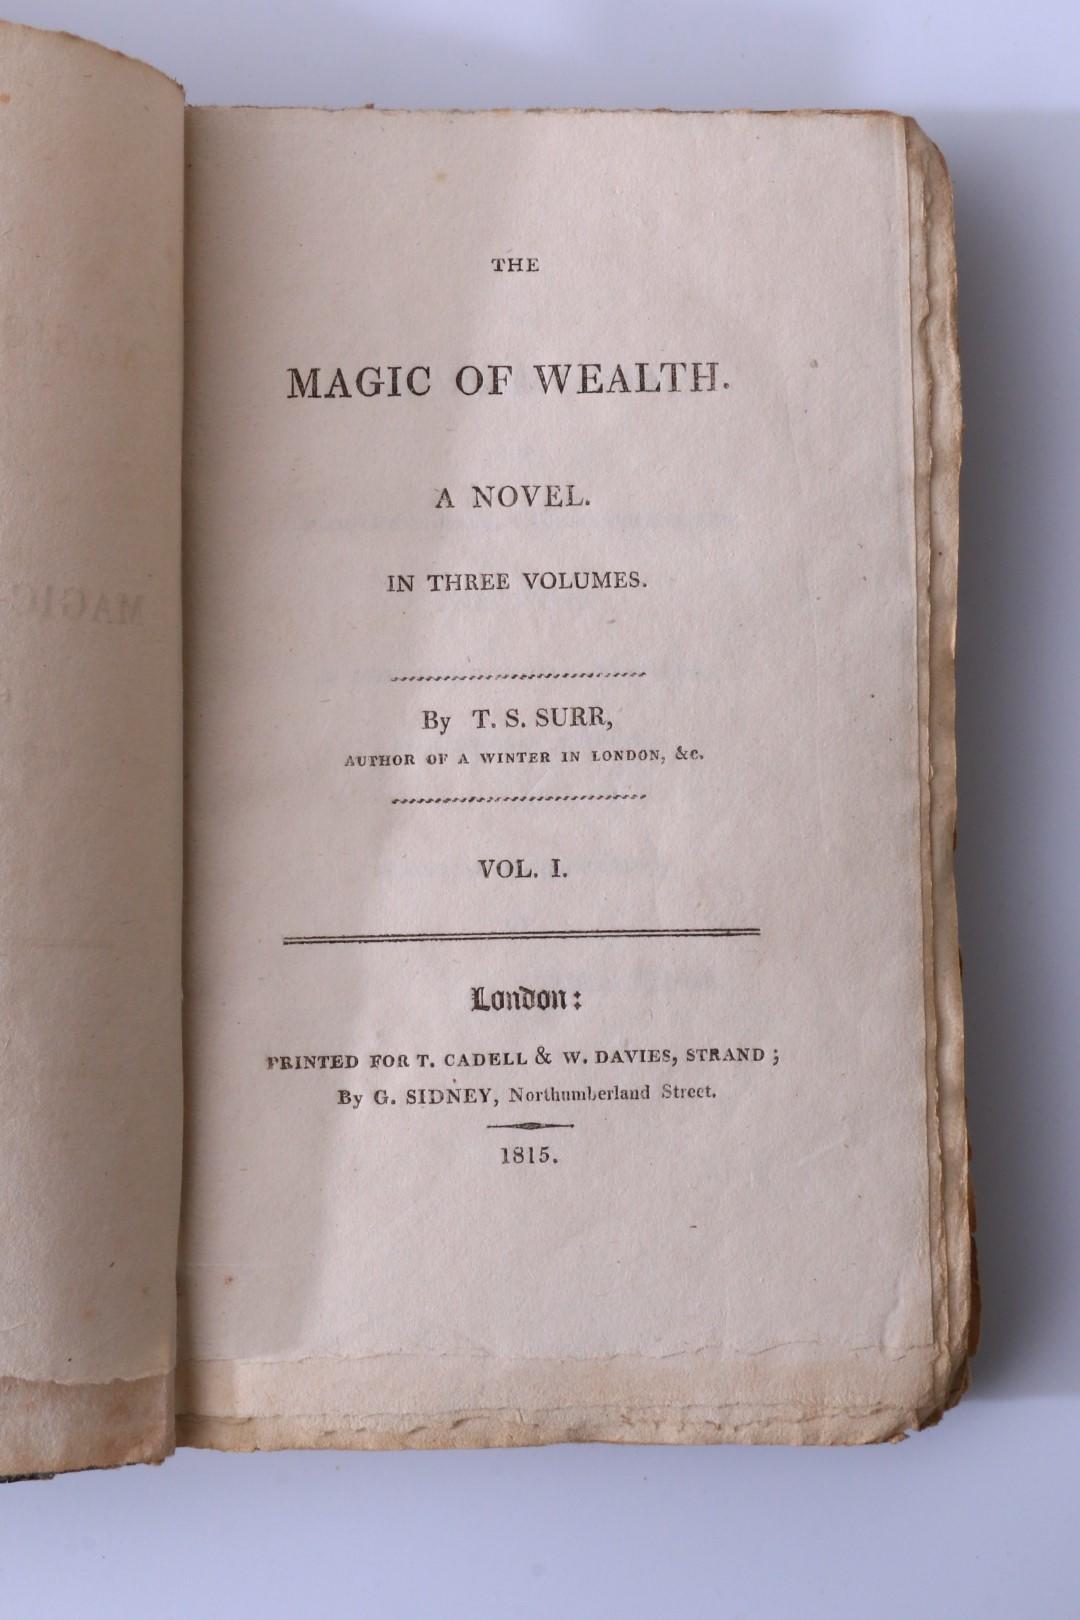 T.S. Surr - The Magic of Wealth - T. Cadell & W. Davies, 1815, First Edition.